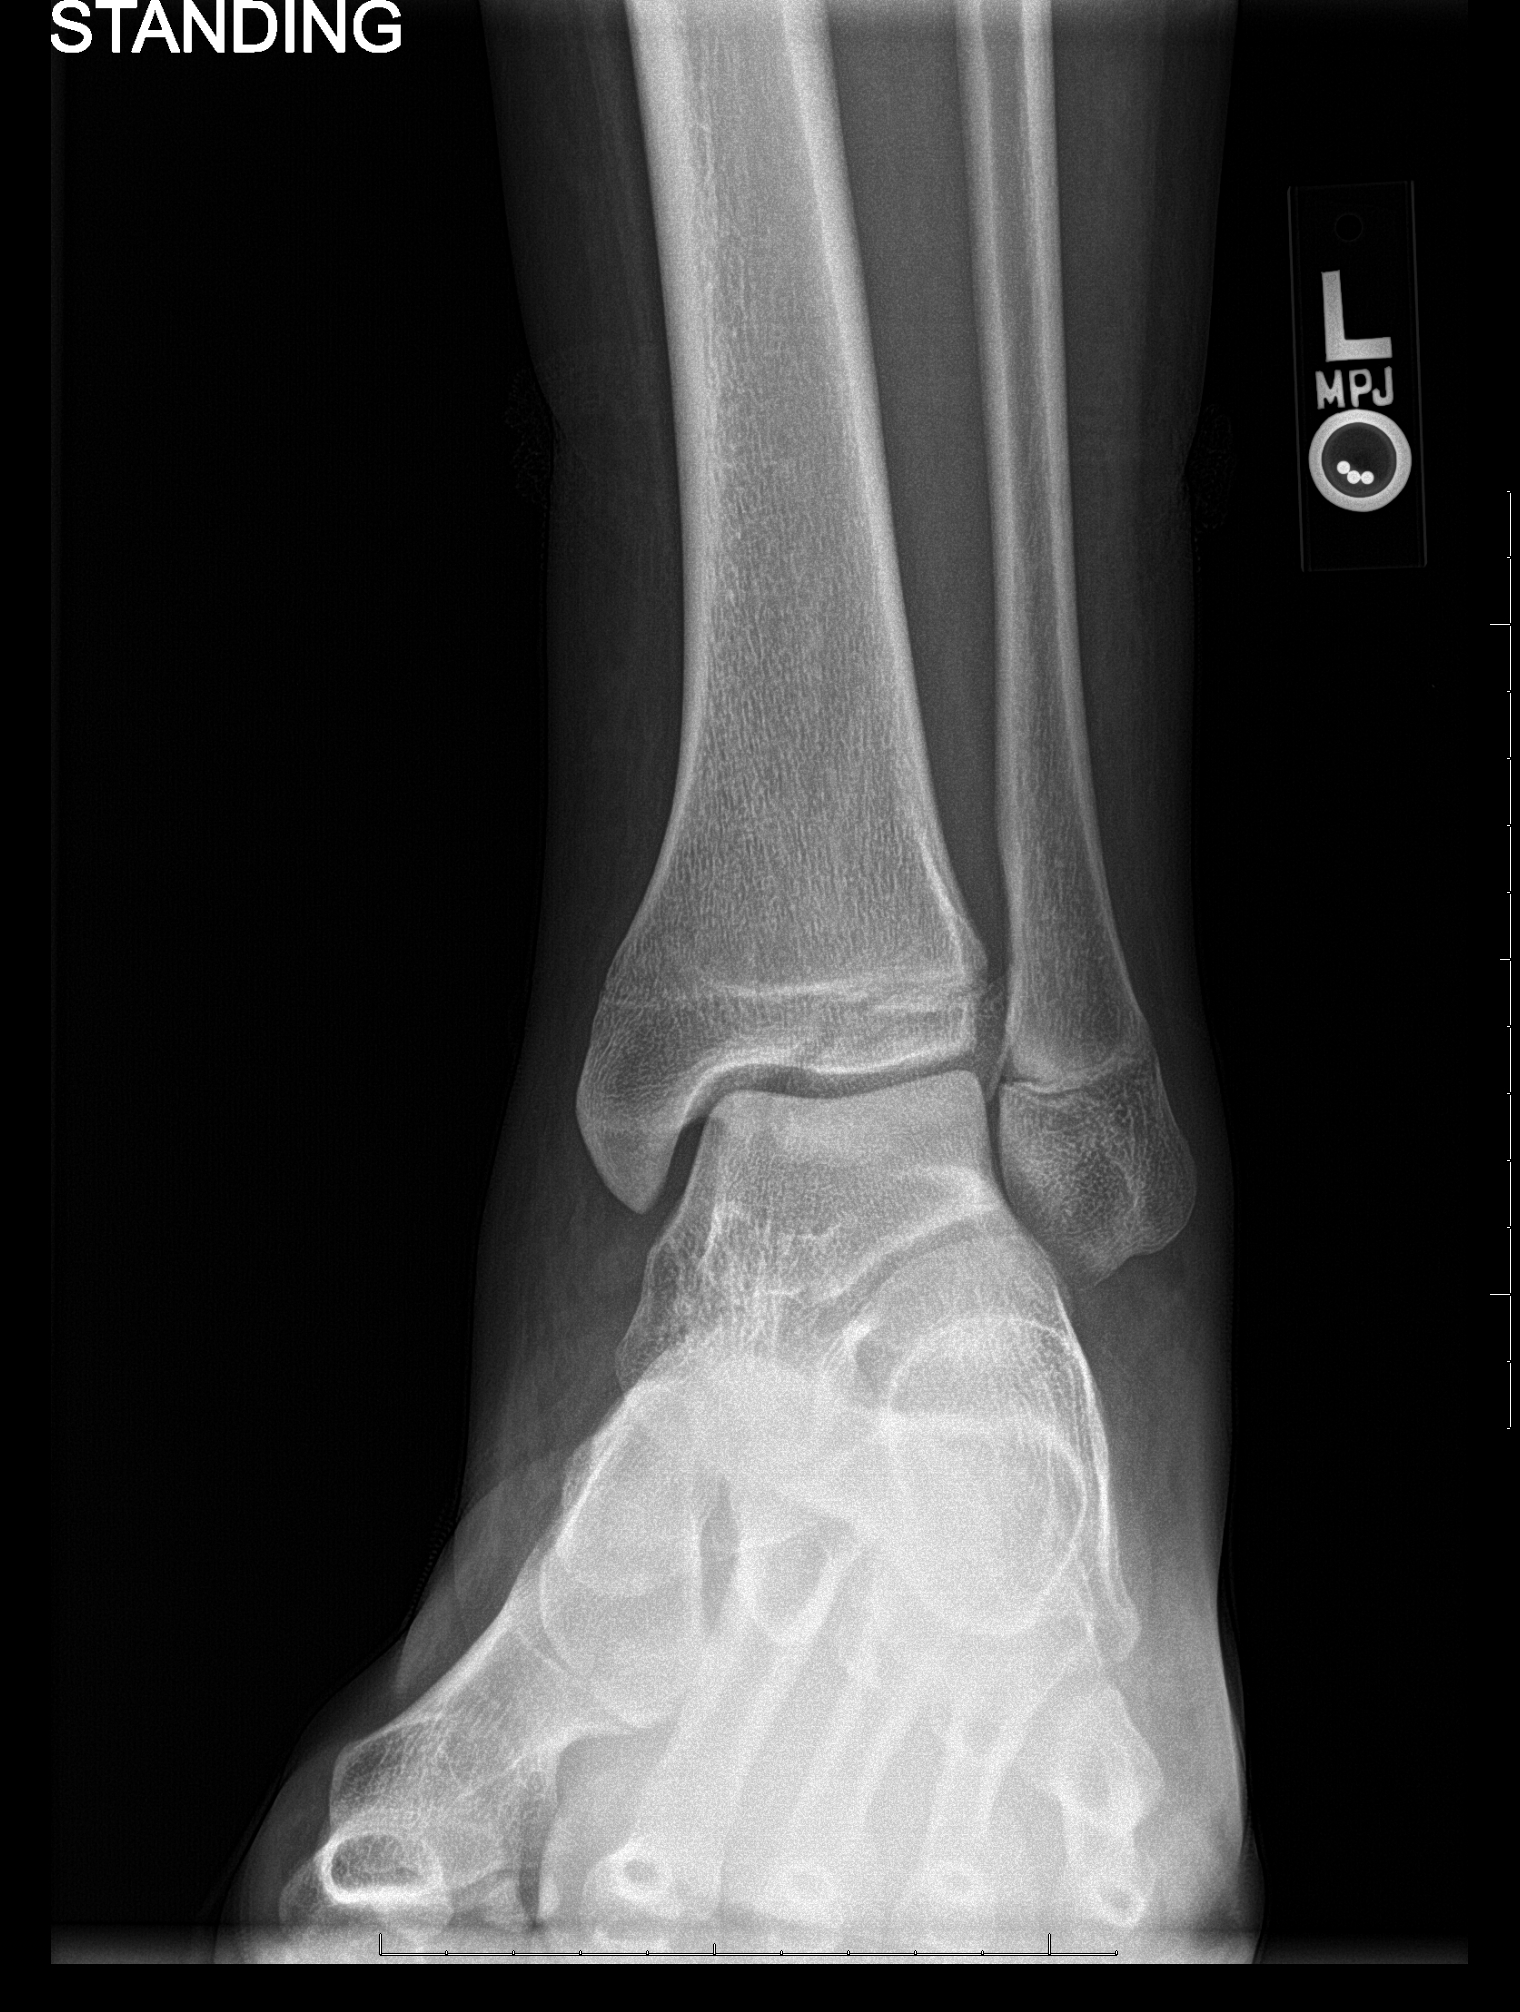 Oblique view of the ankle demonstrating a lucency at the anterolateral aspect of the distal tibial epiphysis consistent with 